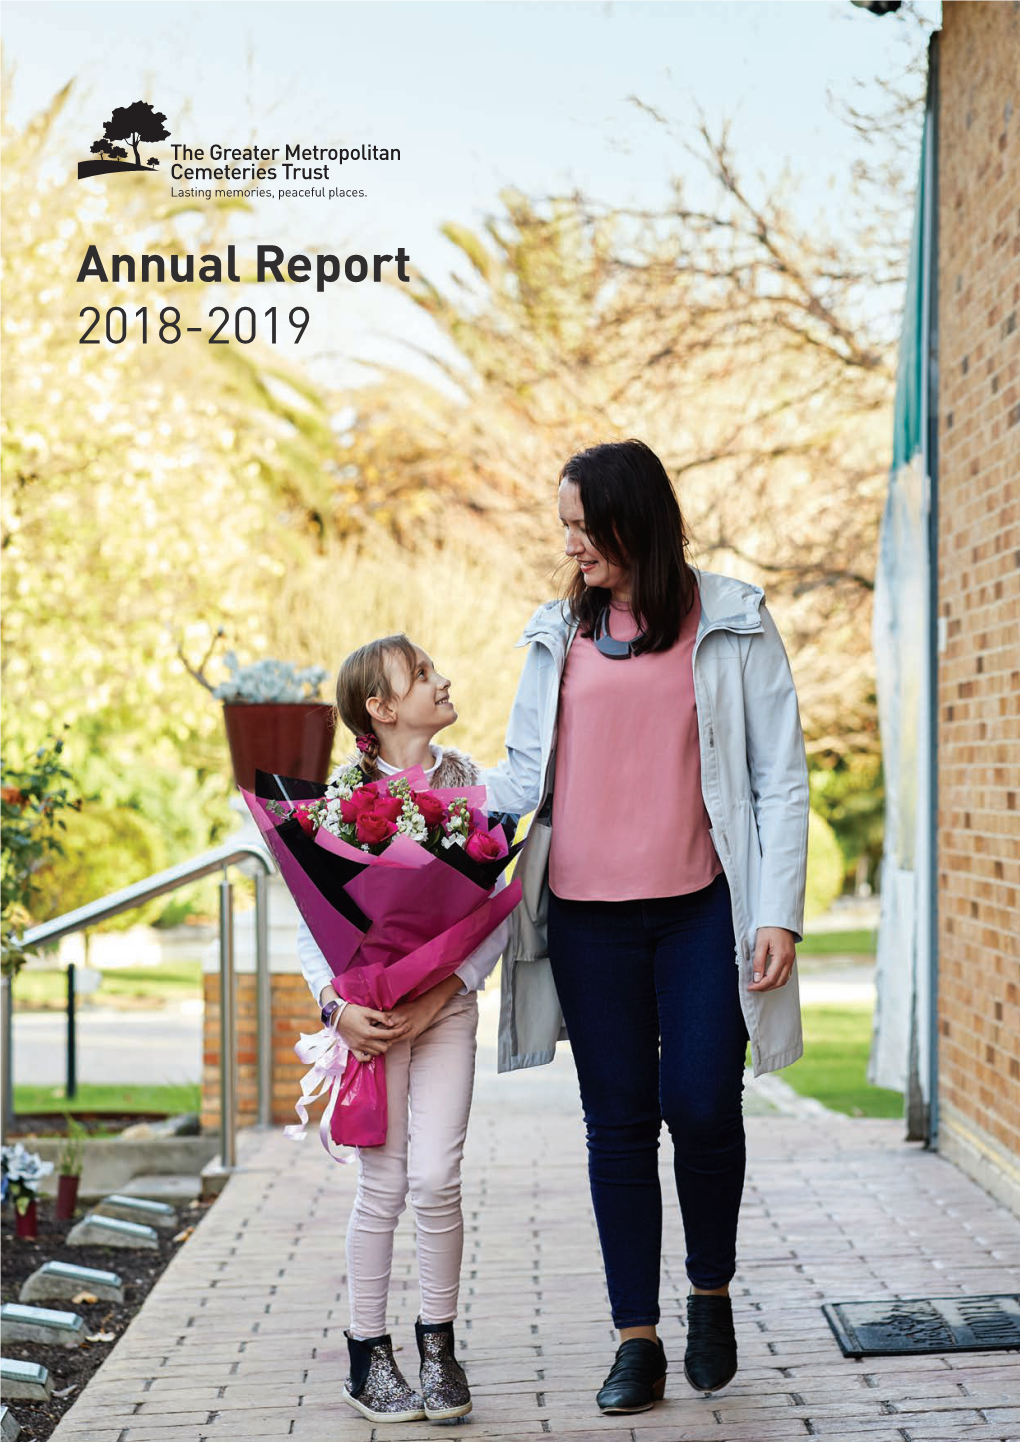 Annual Report 2018-2019 2 Contents